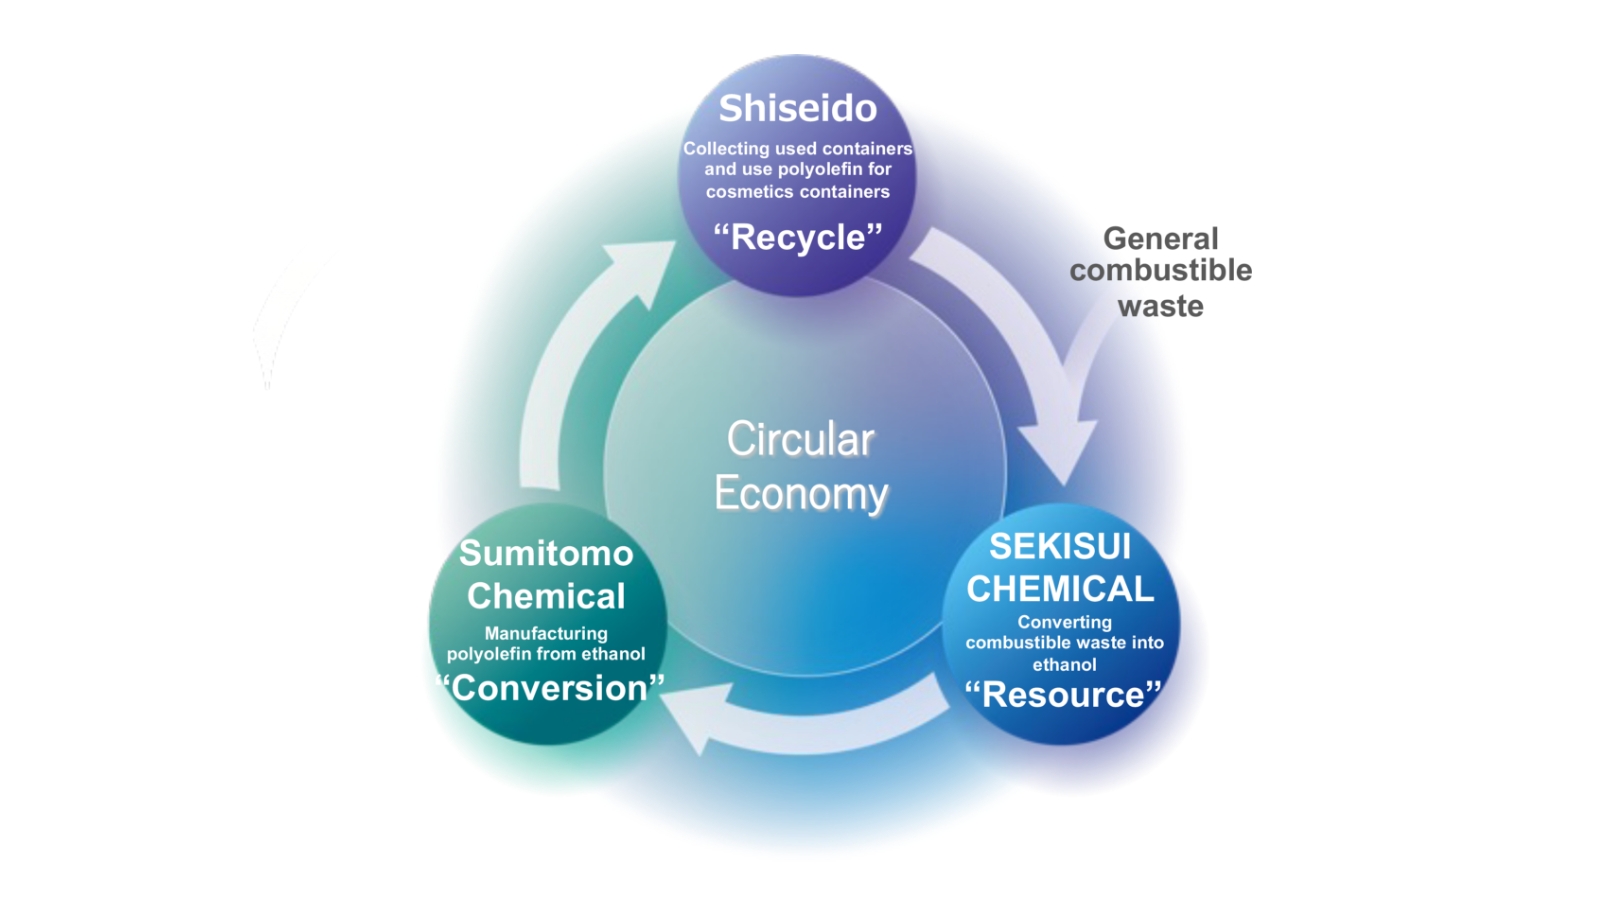 “BeauRing” Circular Model for Plastic Cosmetics Containers